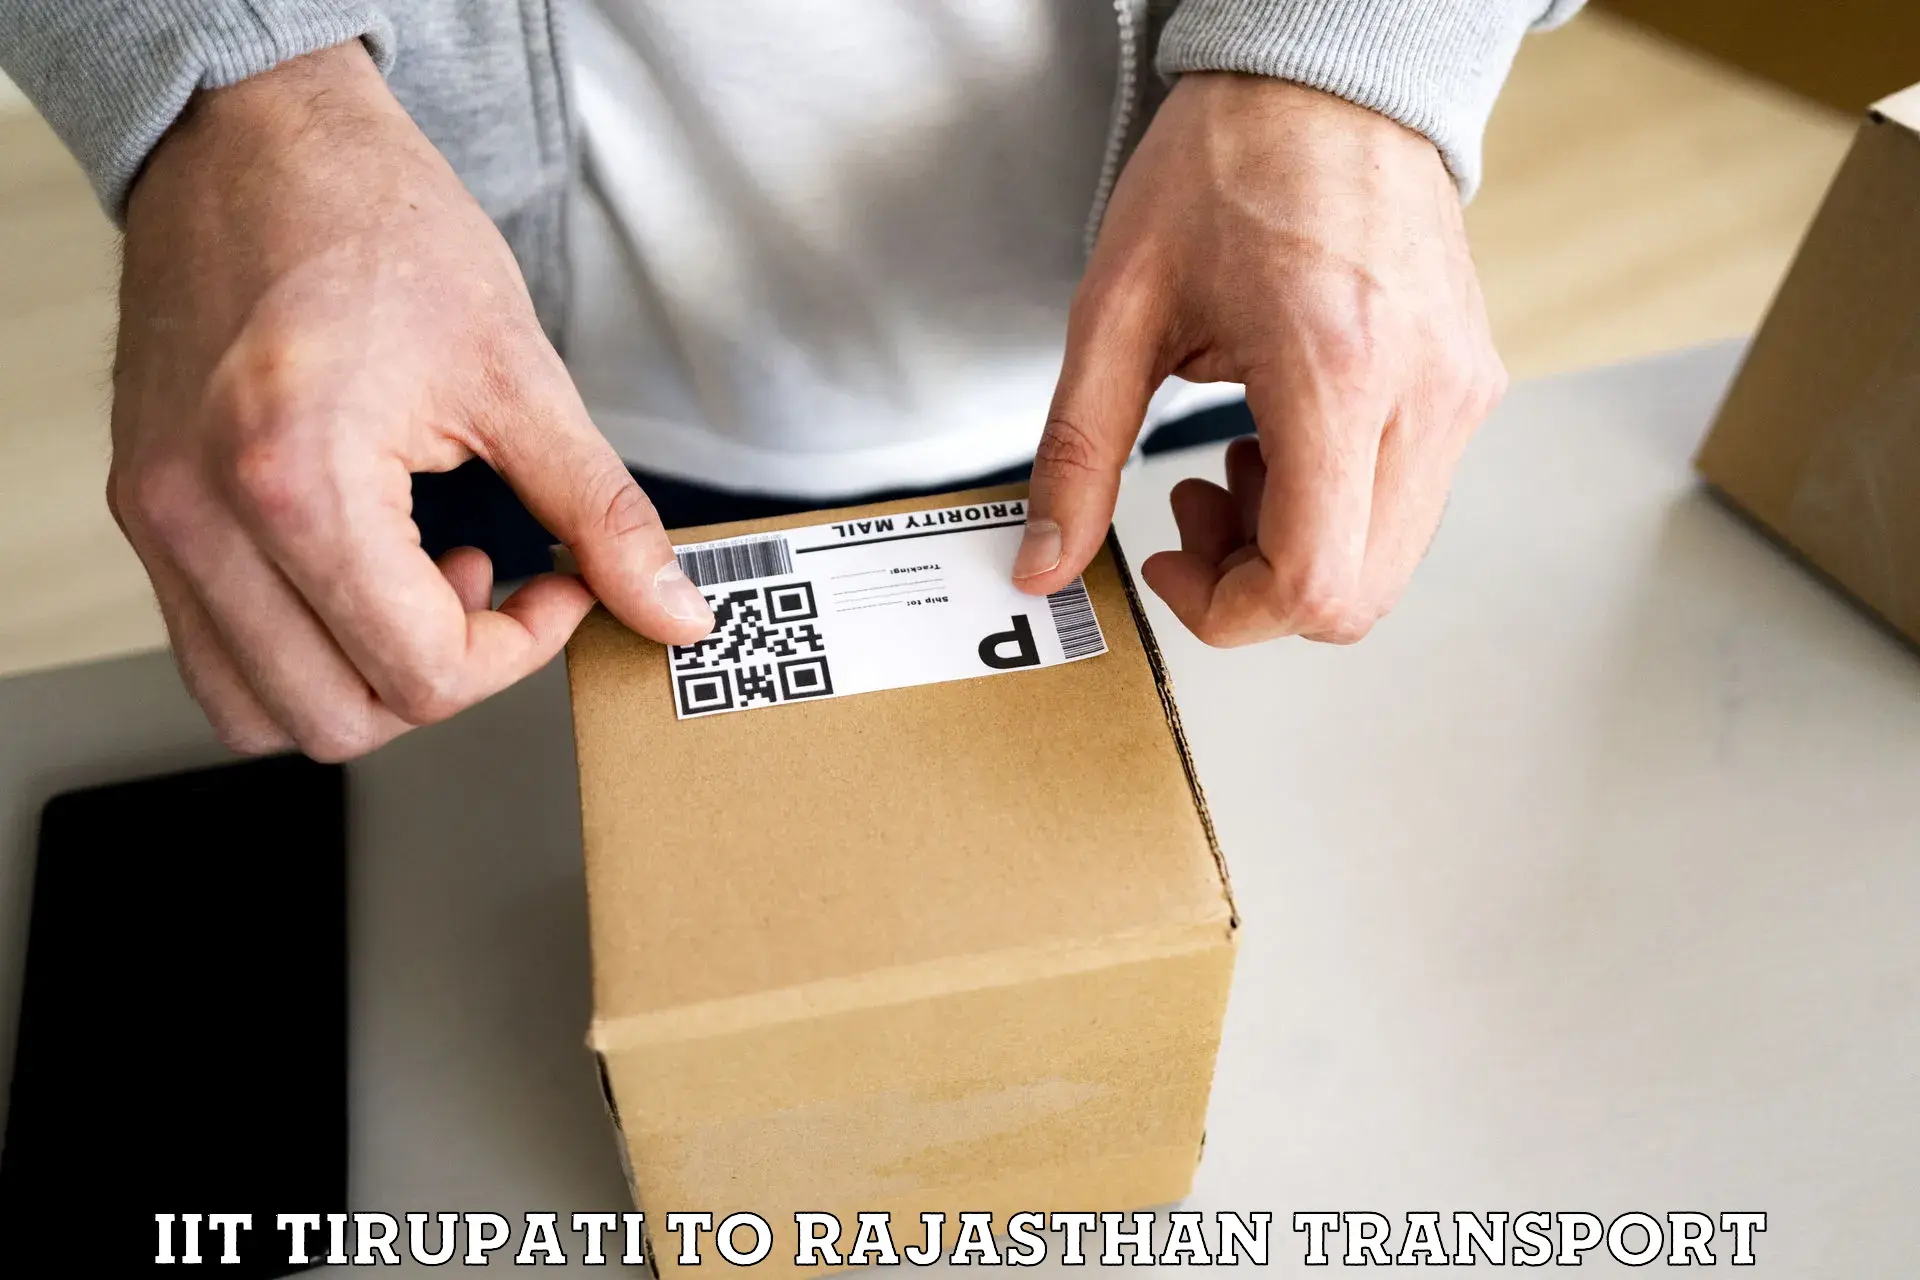 Goods delivery service IIT Tirupati to Rajasthan